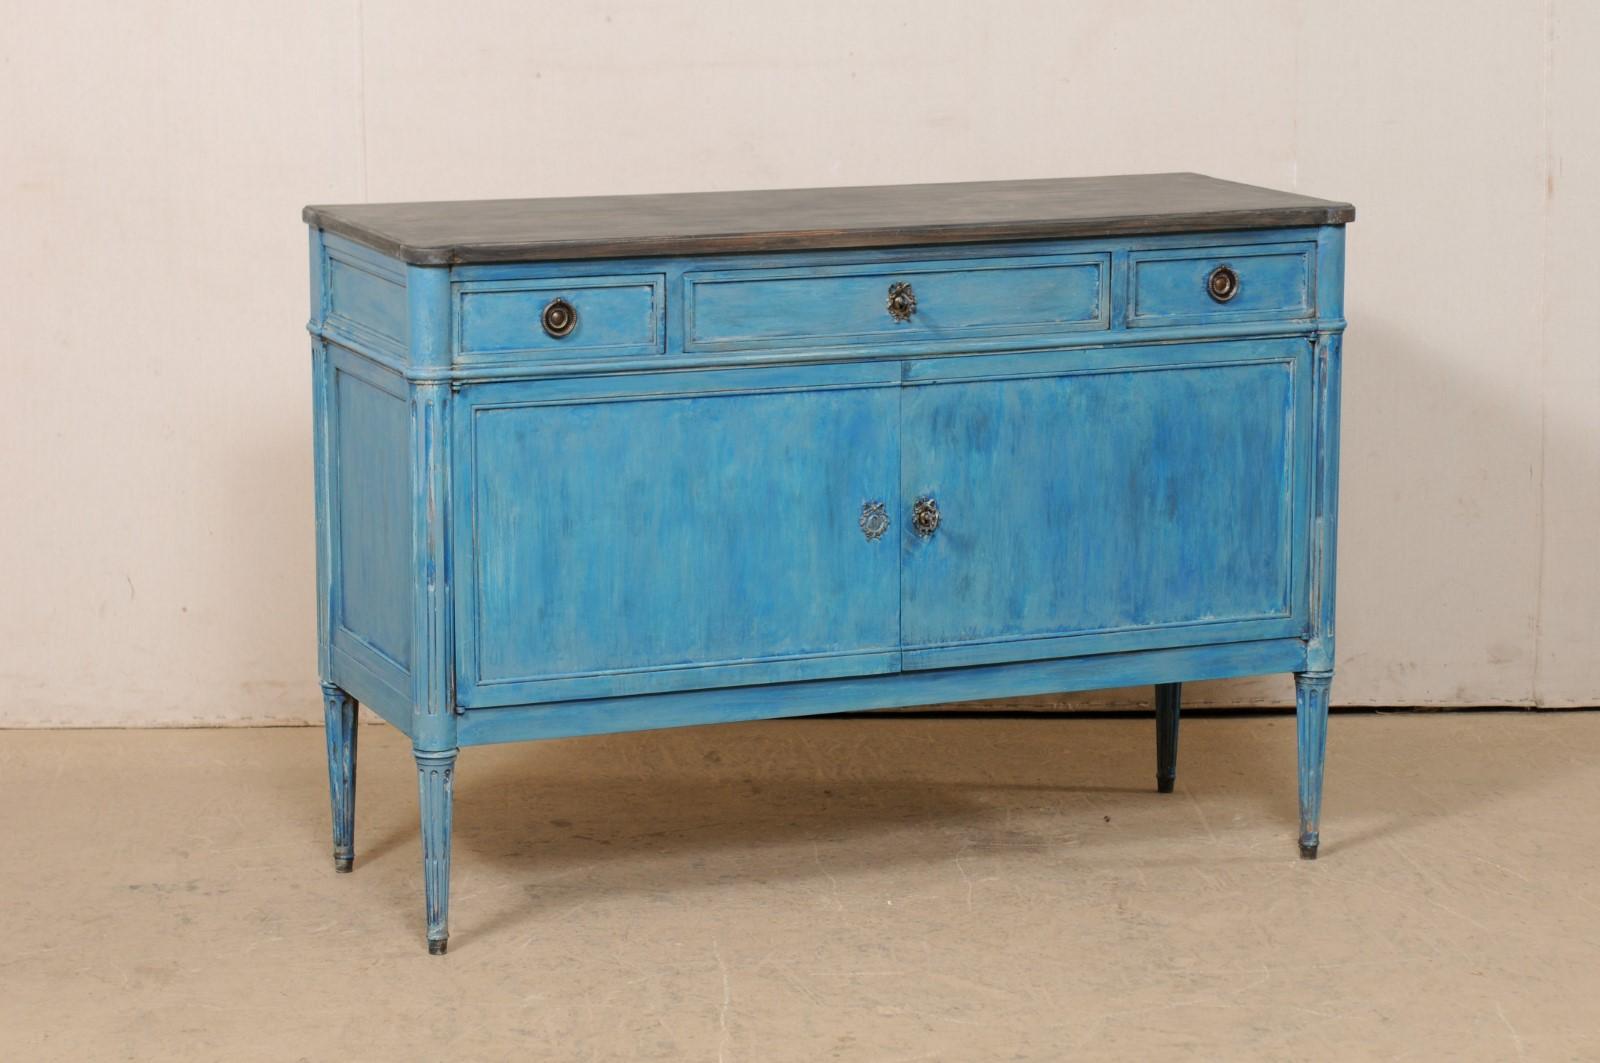 A French neoclassical style carved and painted wood buffet cabinet from the early 20th century. This antique cabinet from France features a rectangular-shaped top top, with pronounced rounded corners, which rests atop a neoclassical style case which